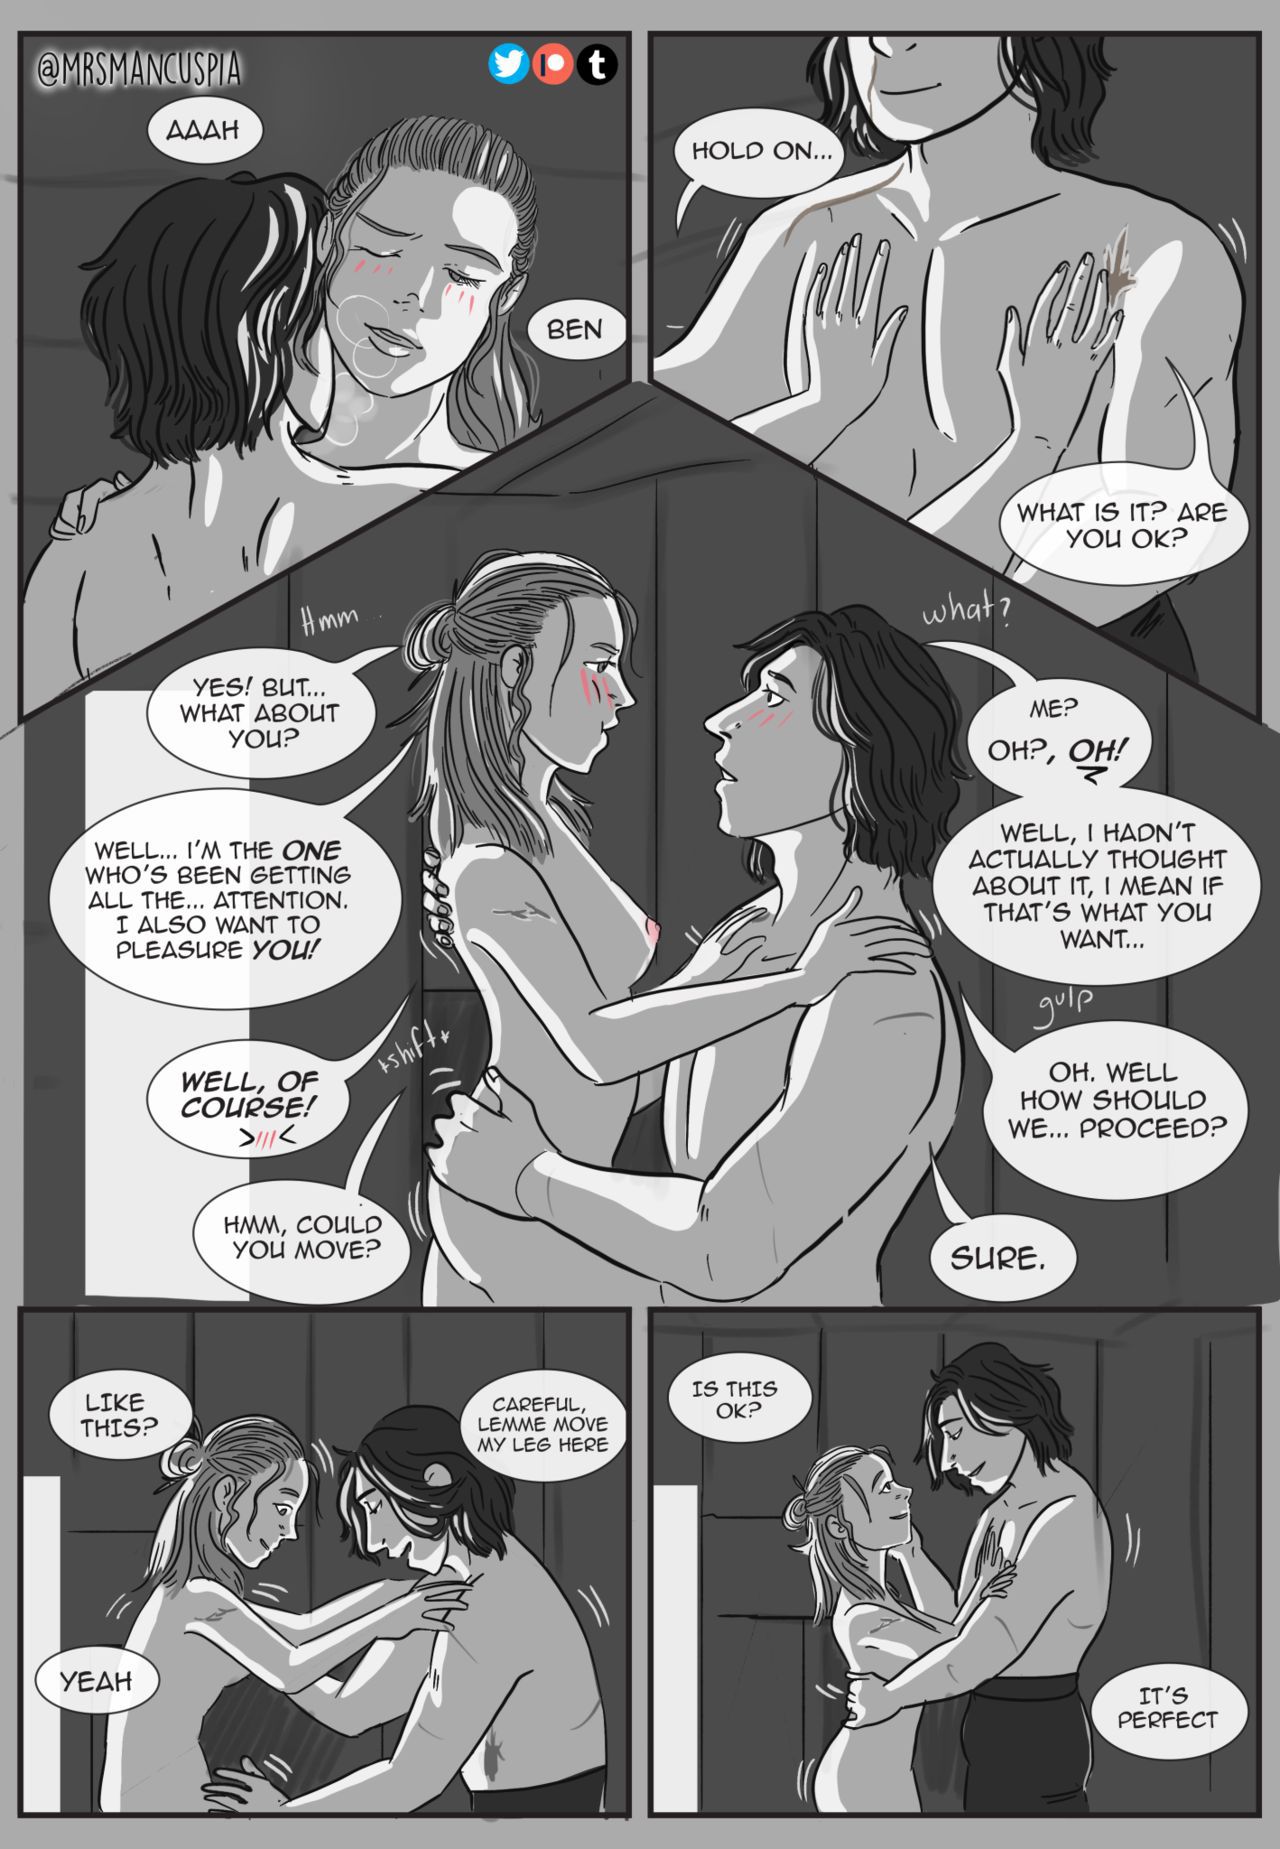 [Mrs Mancuspia] Bedroom Learning (Star Wars) [Ongoing] 41